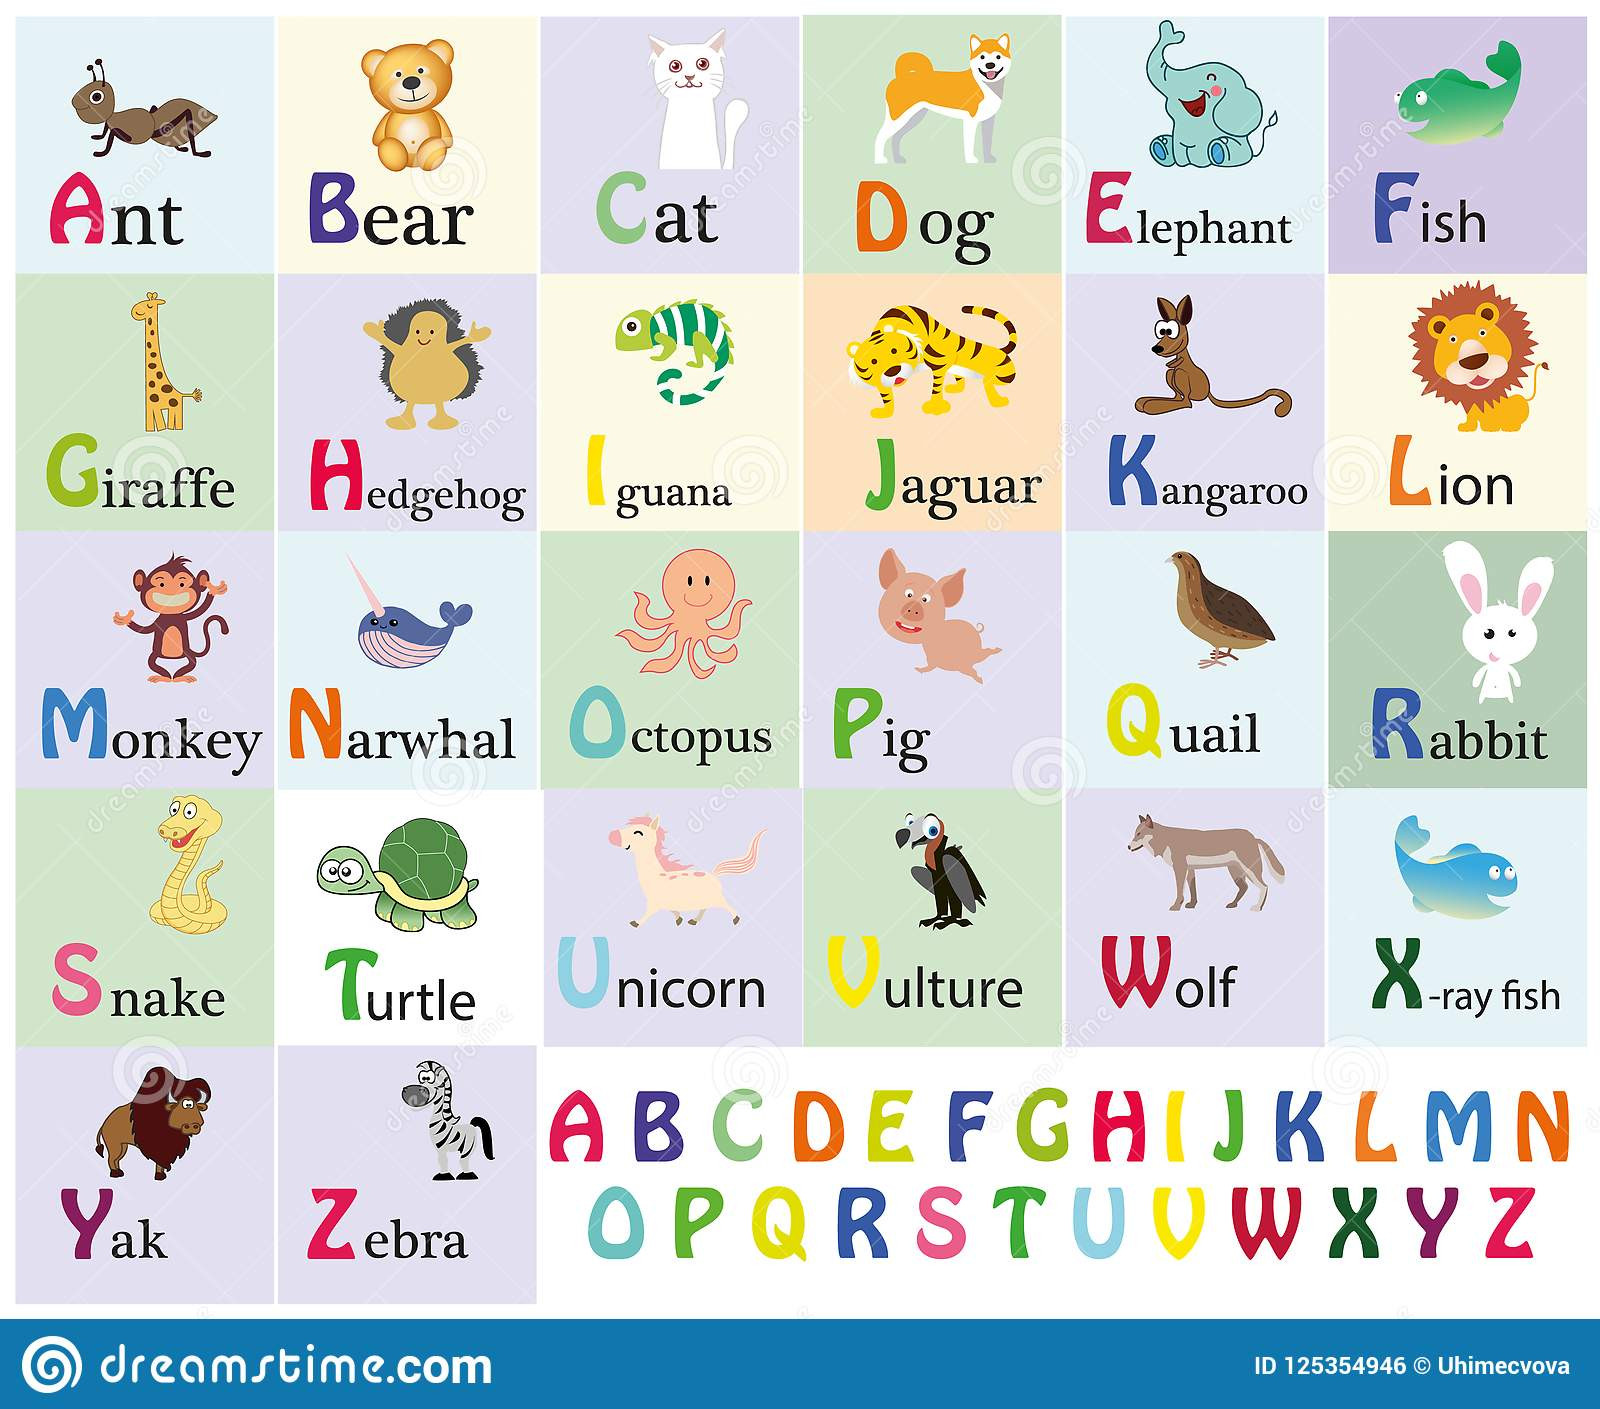 K5 Adds Free and Printable Dolch and Fry Sight Words Flashcards